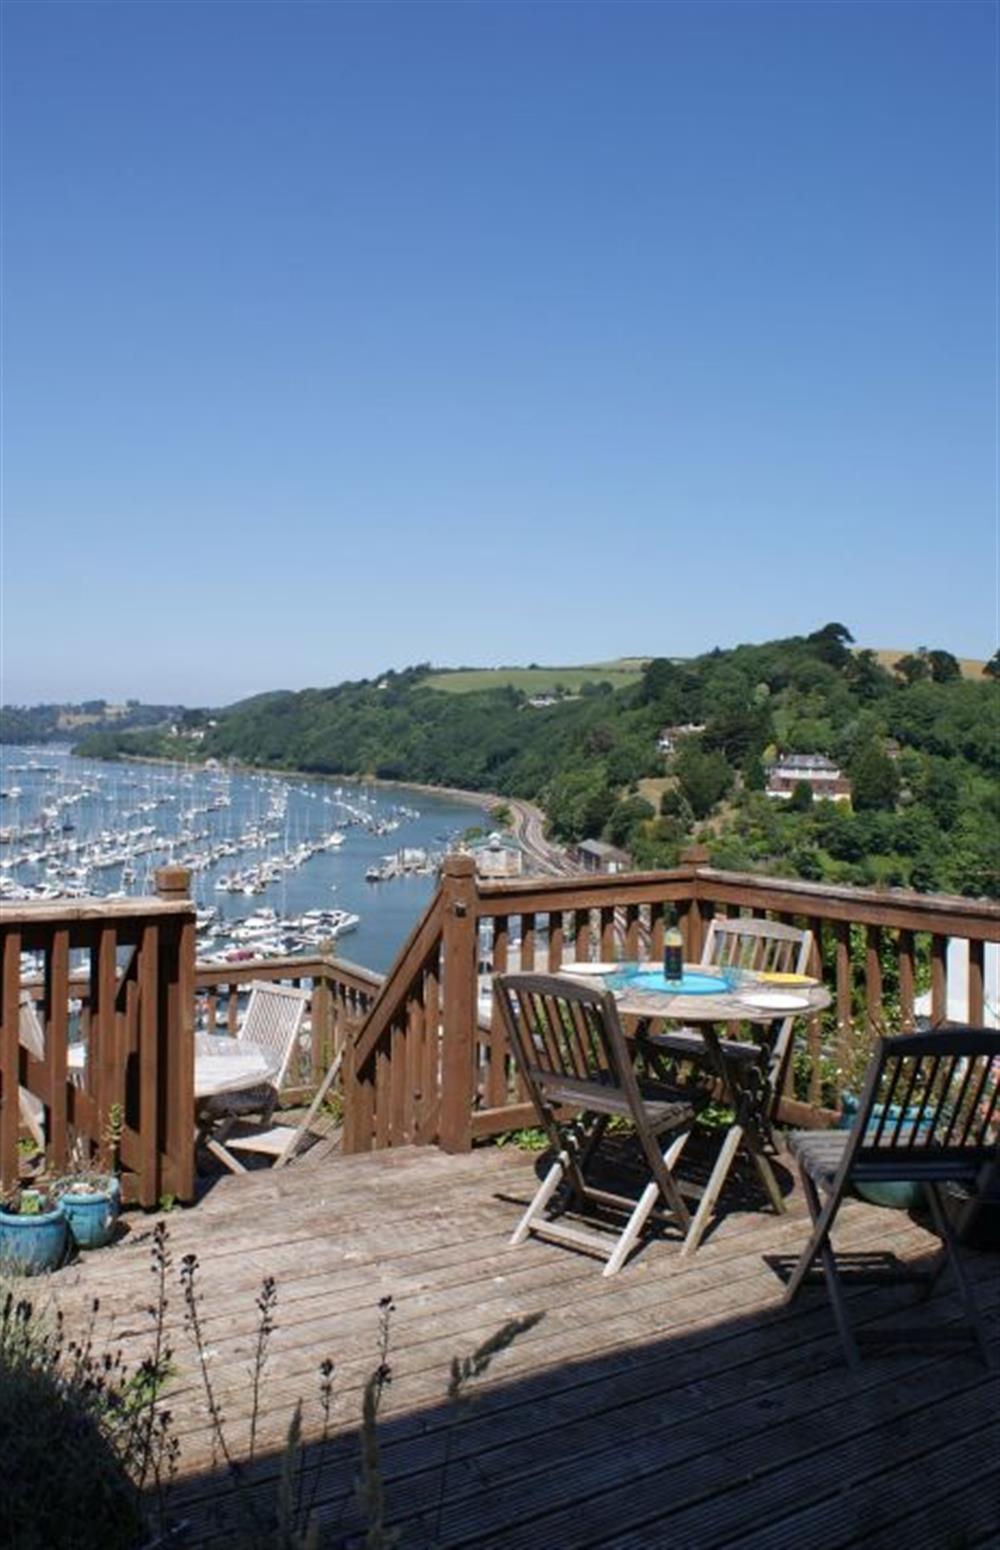 The views across the harbour at The Boathouse, Kingswear, Torbay and the Red Cliffs